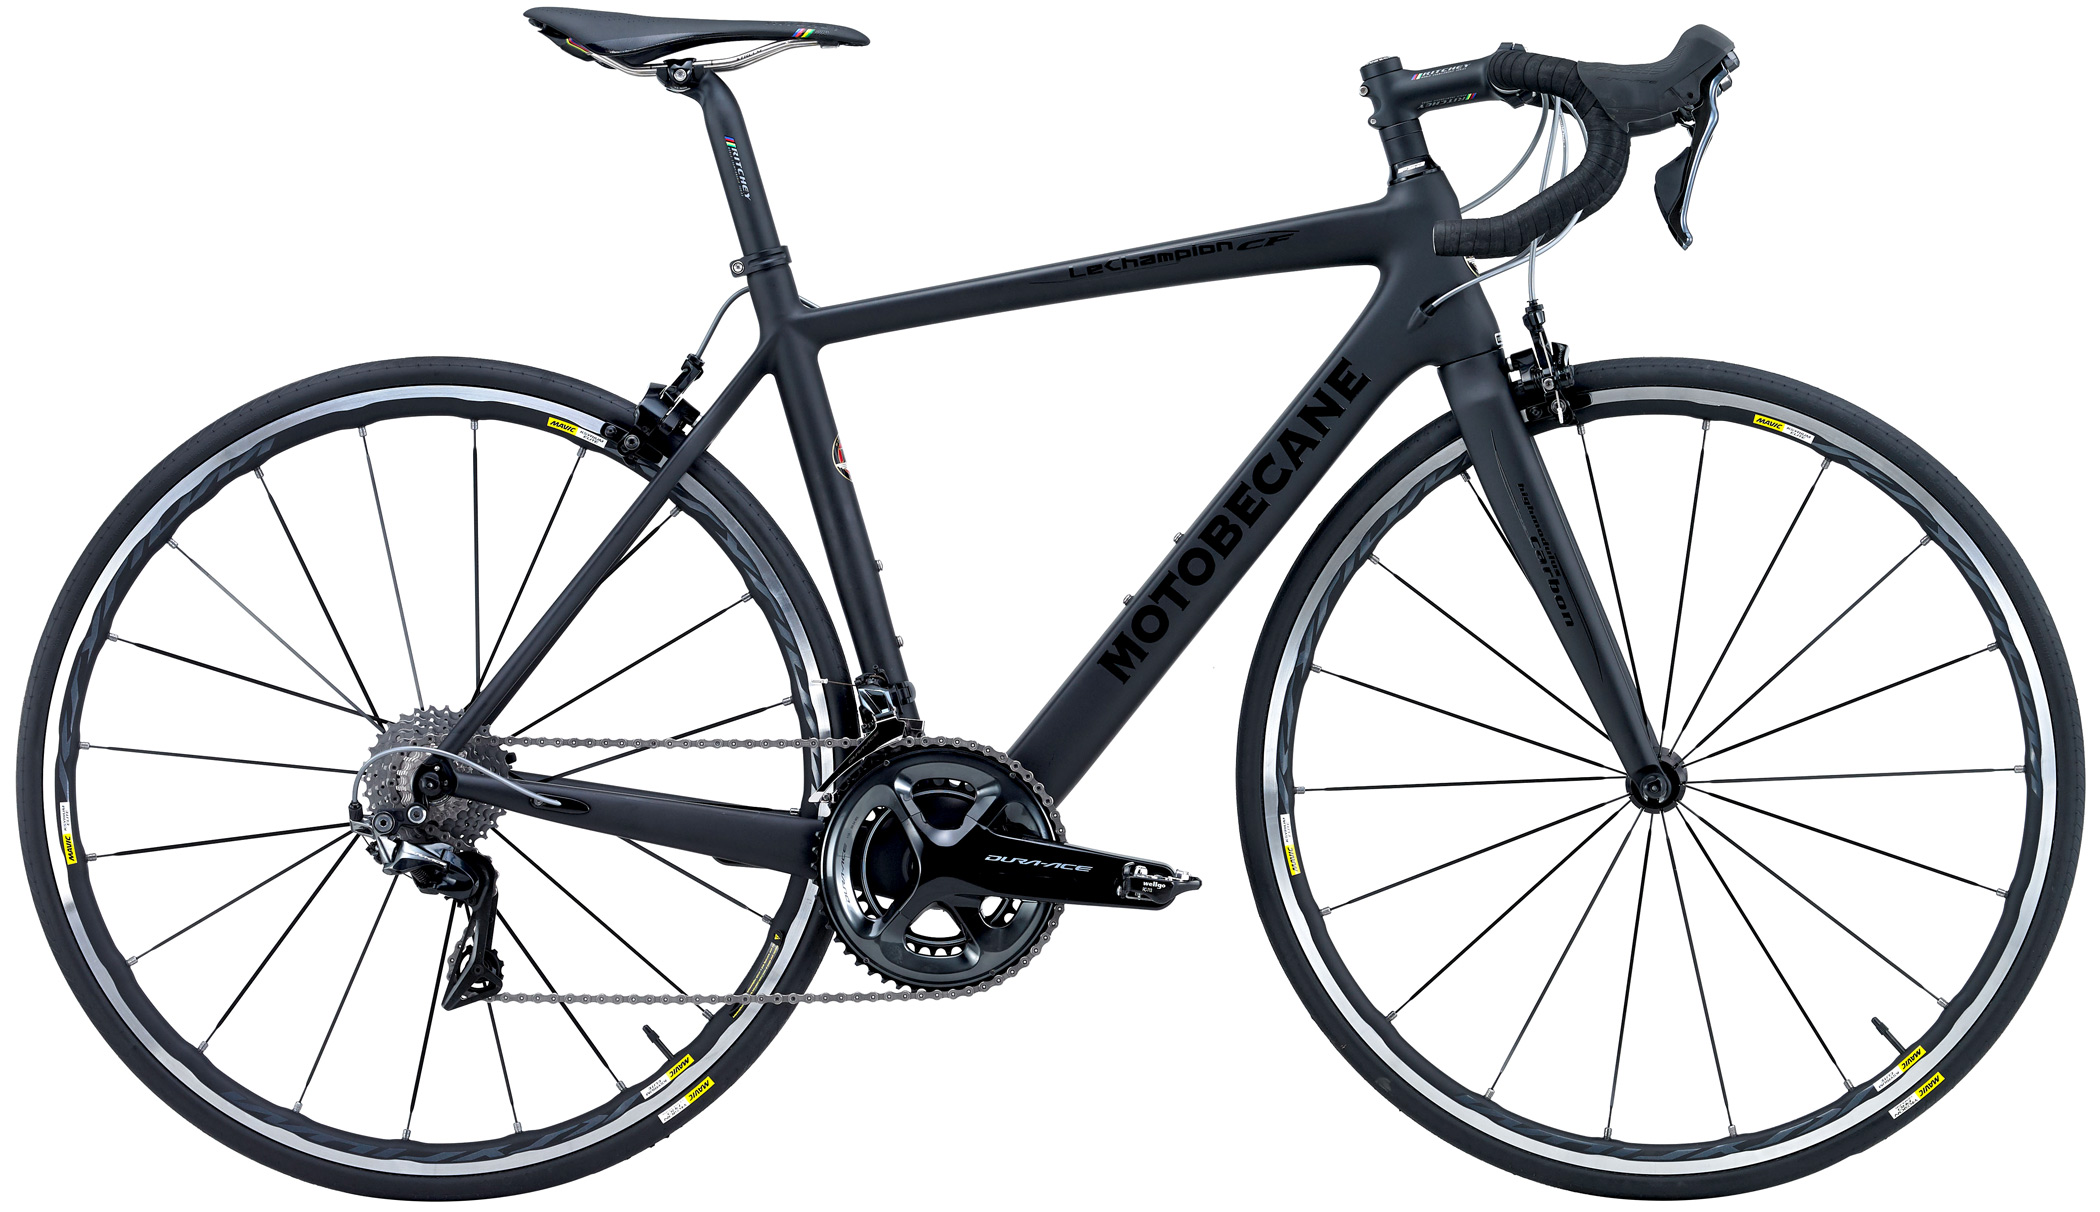 Save Up To 60% Off Shimano Dura Ace 9100 Equipped, Full Carbon Aero